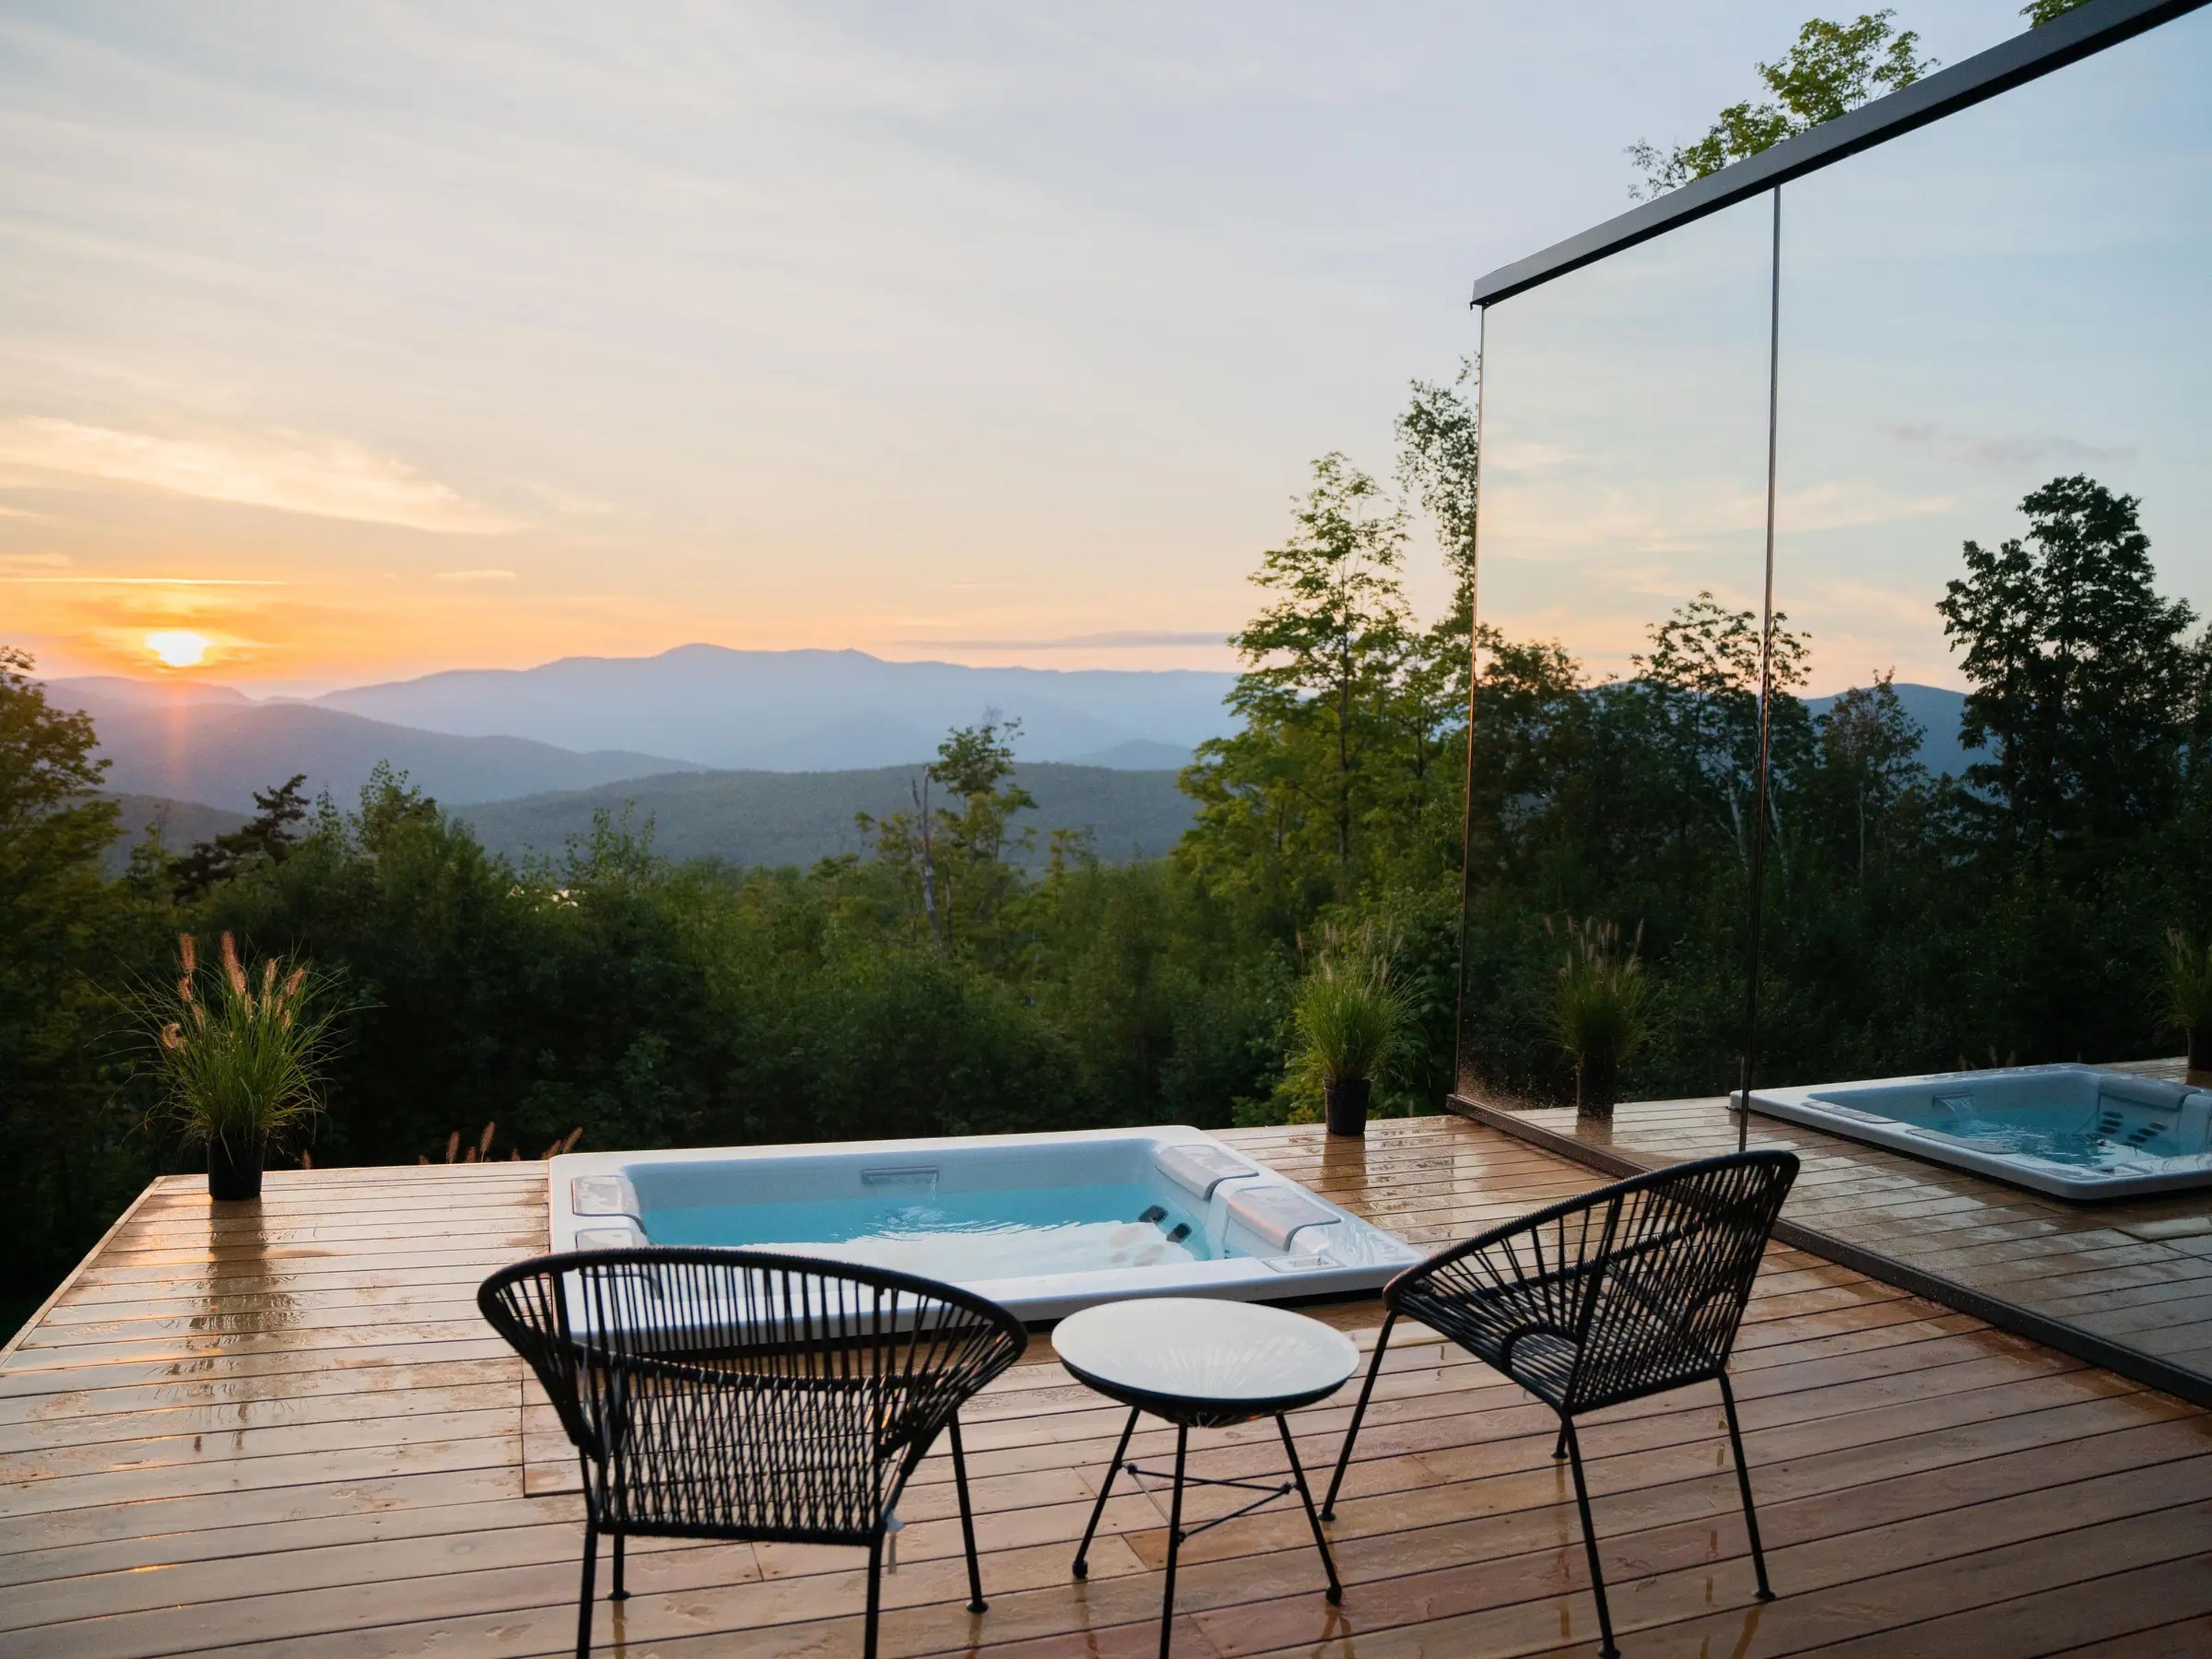 Photo of lawn chairs and a hot tub overlooking mountains at sunset